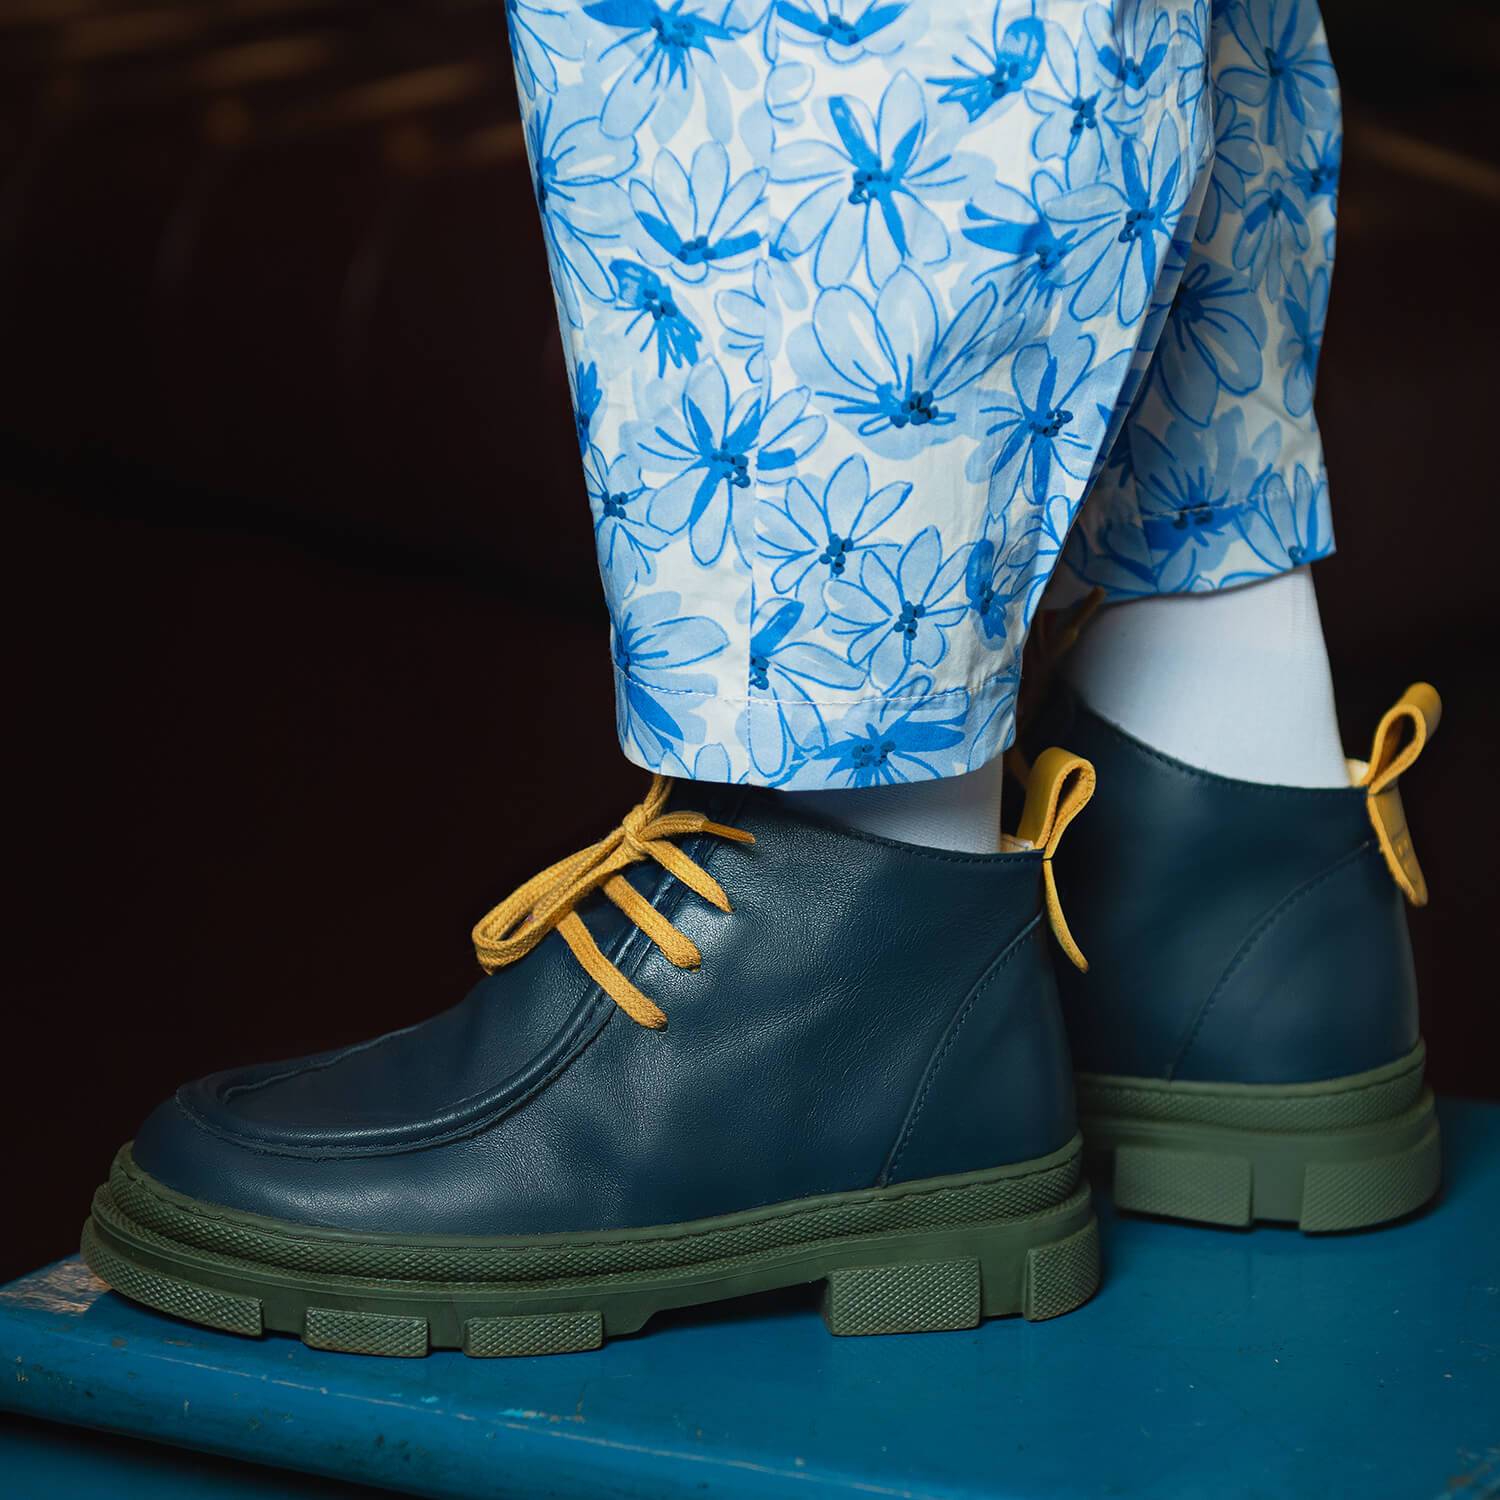 Wallabee Boots - Dark Blue Shoes Dulis Shoes 